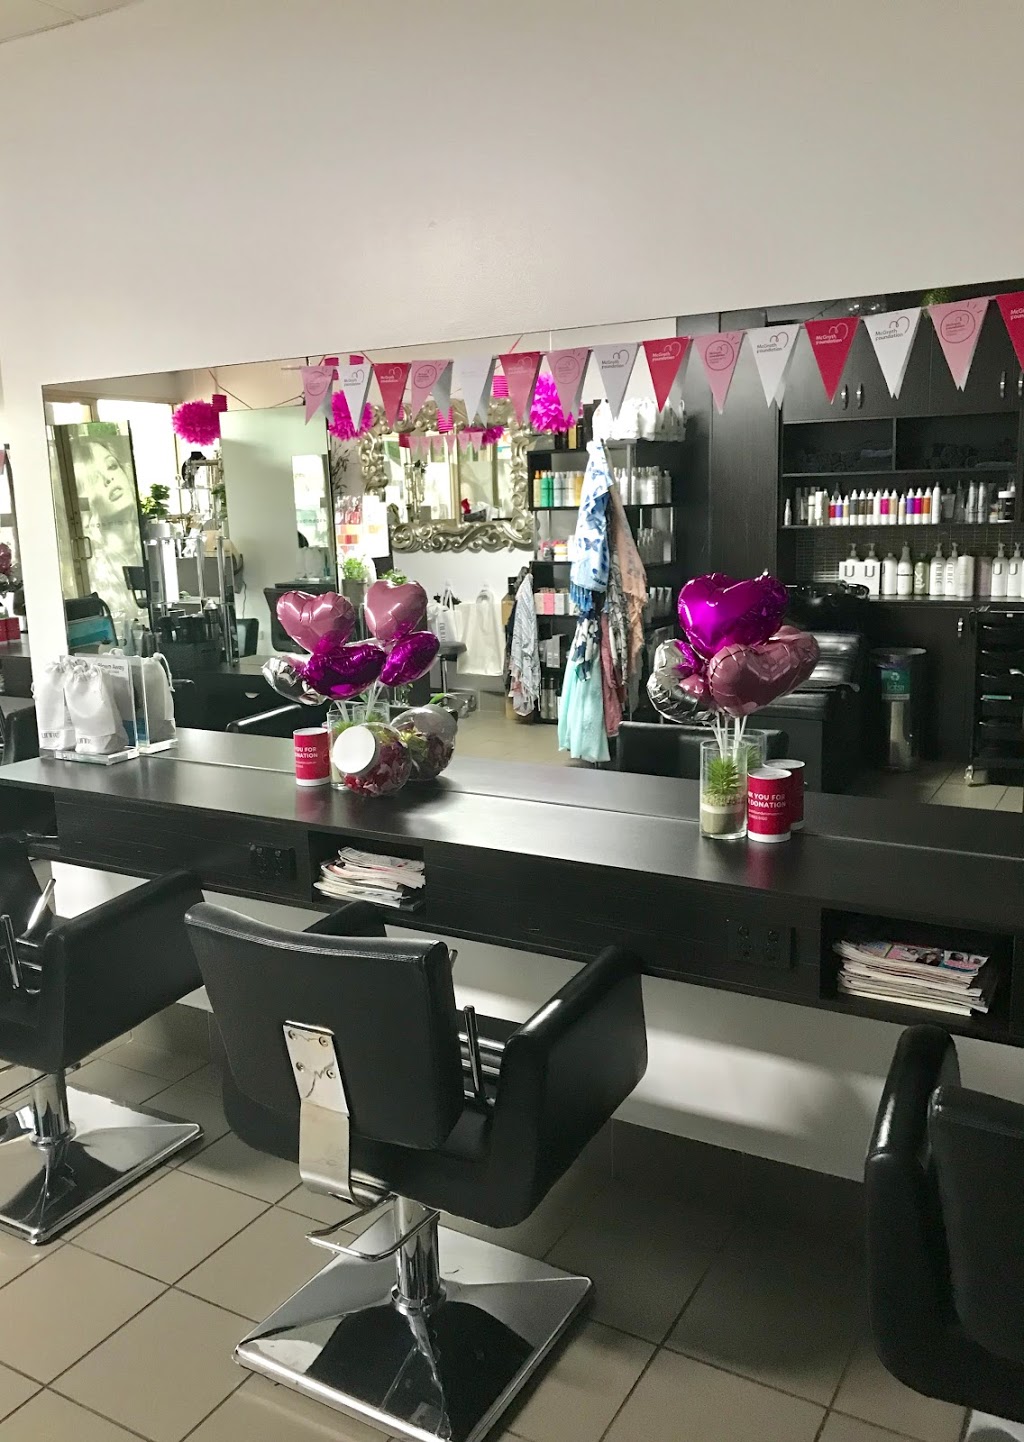 Altered Images Hair And Beauty | 3/216 Shaw Rd, Wavell Heights QLD 4012, Australia | Phone: (07) 3260 6445